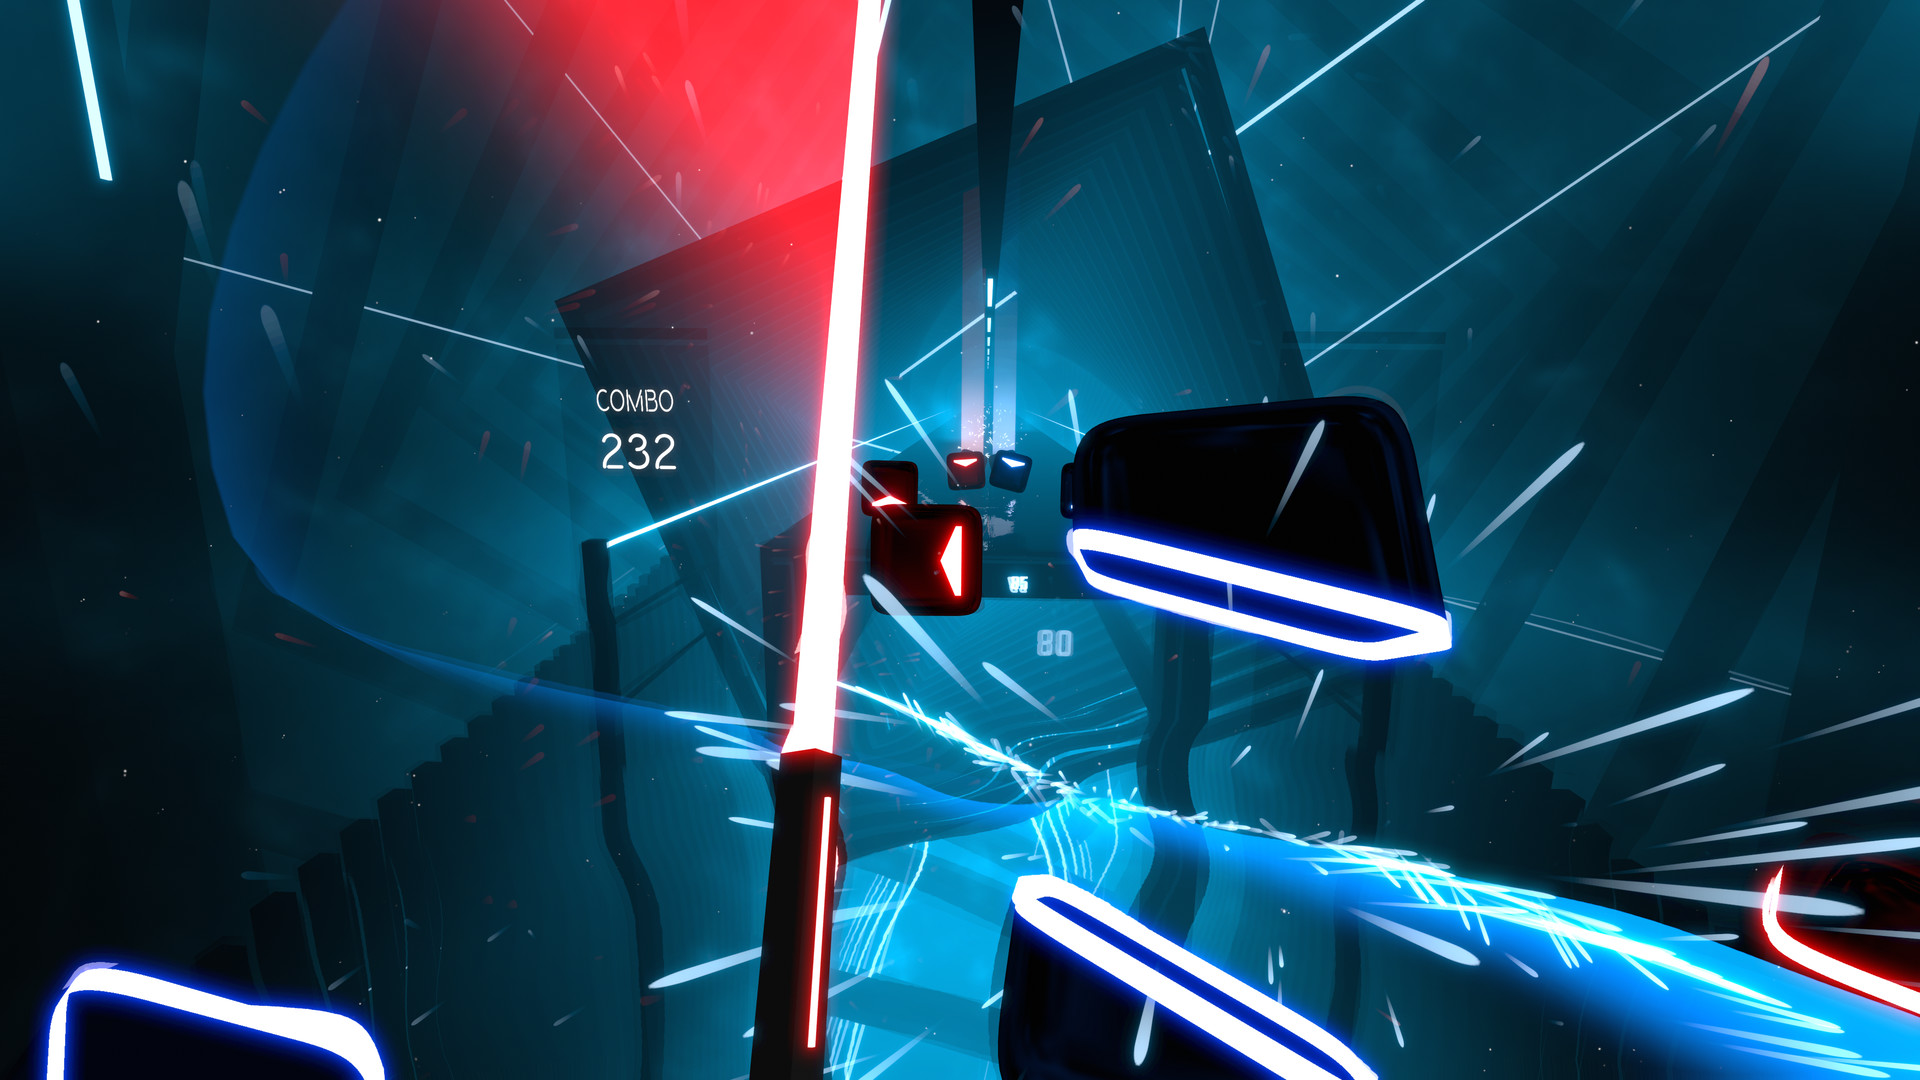 Screenshot from the VR game Beat Saber